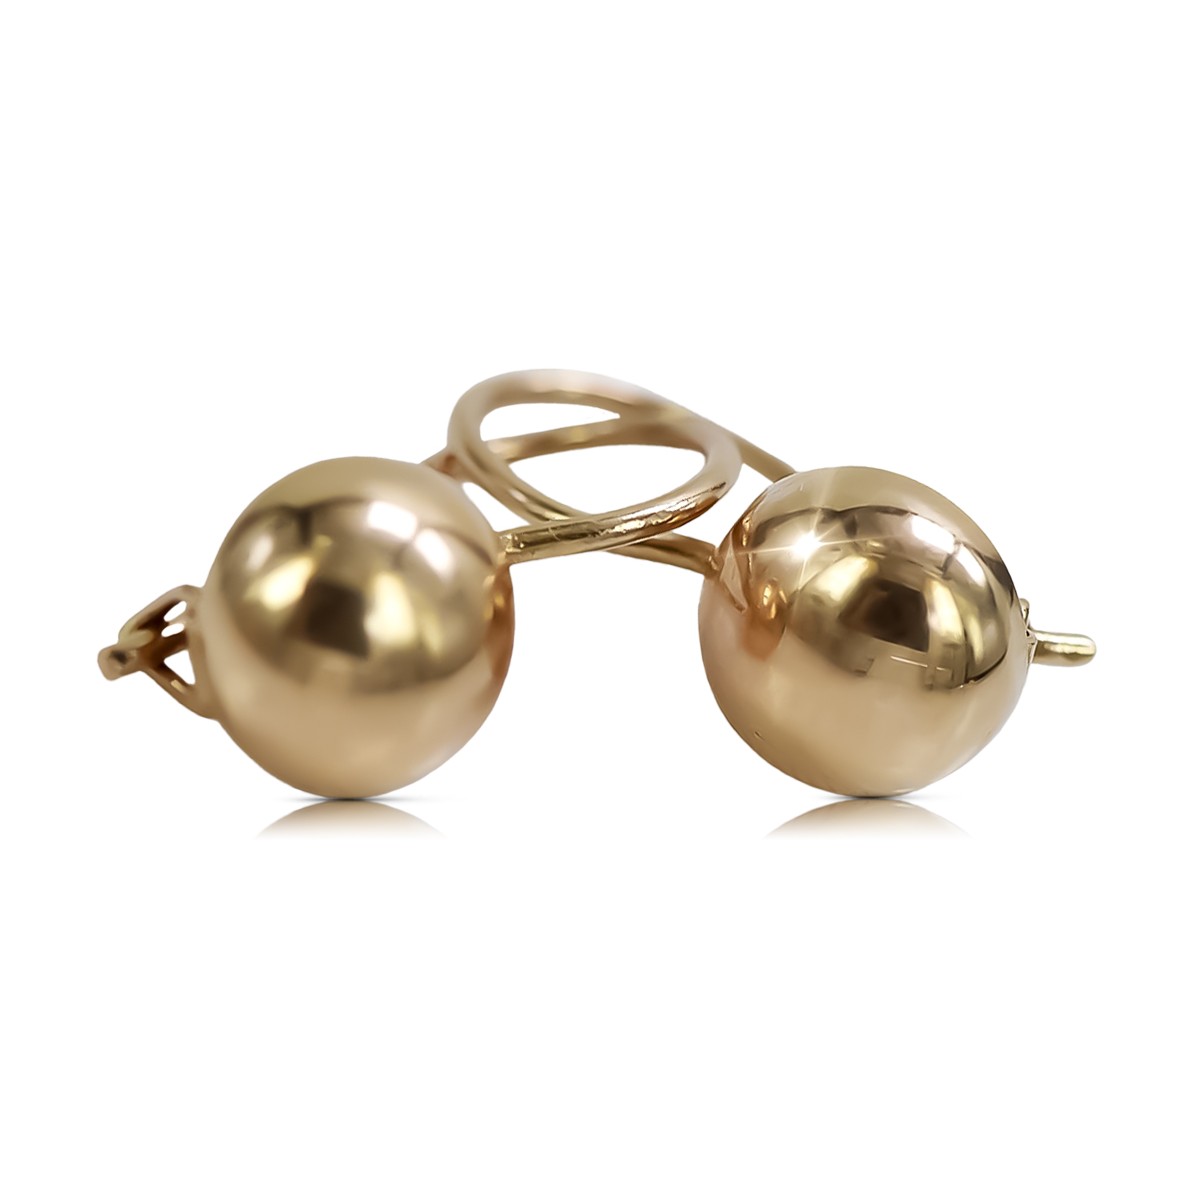 "Vintage 14K 585 Gold Ball Earrings in Rose Pink, No Stones" ven178